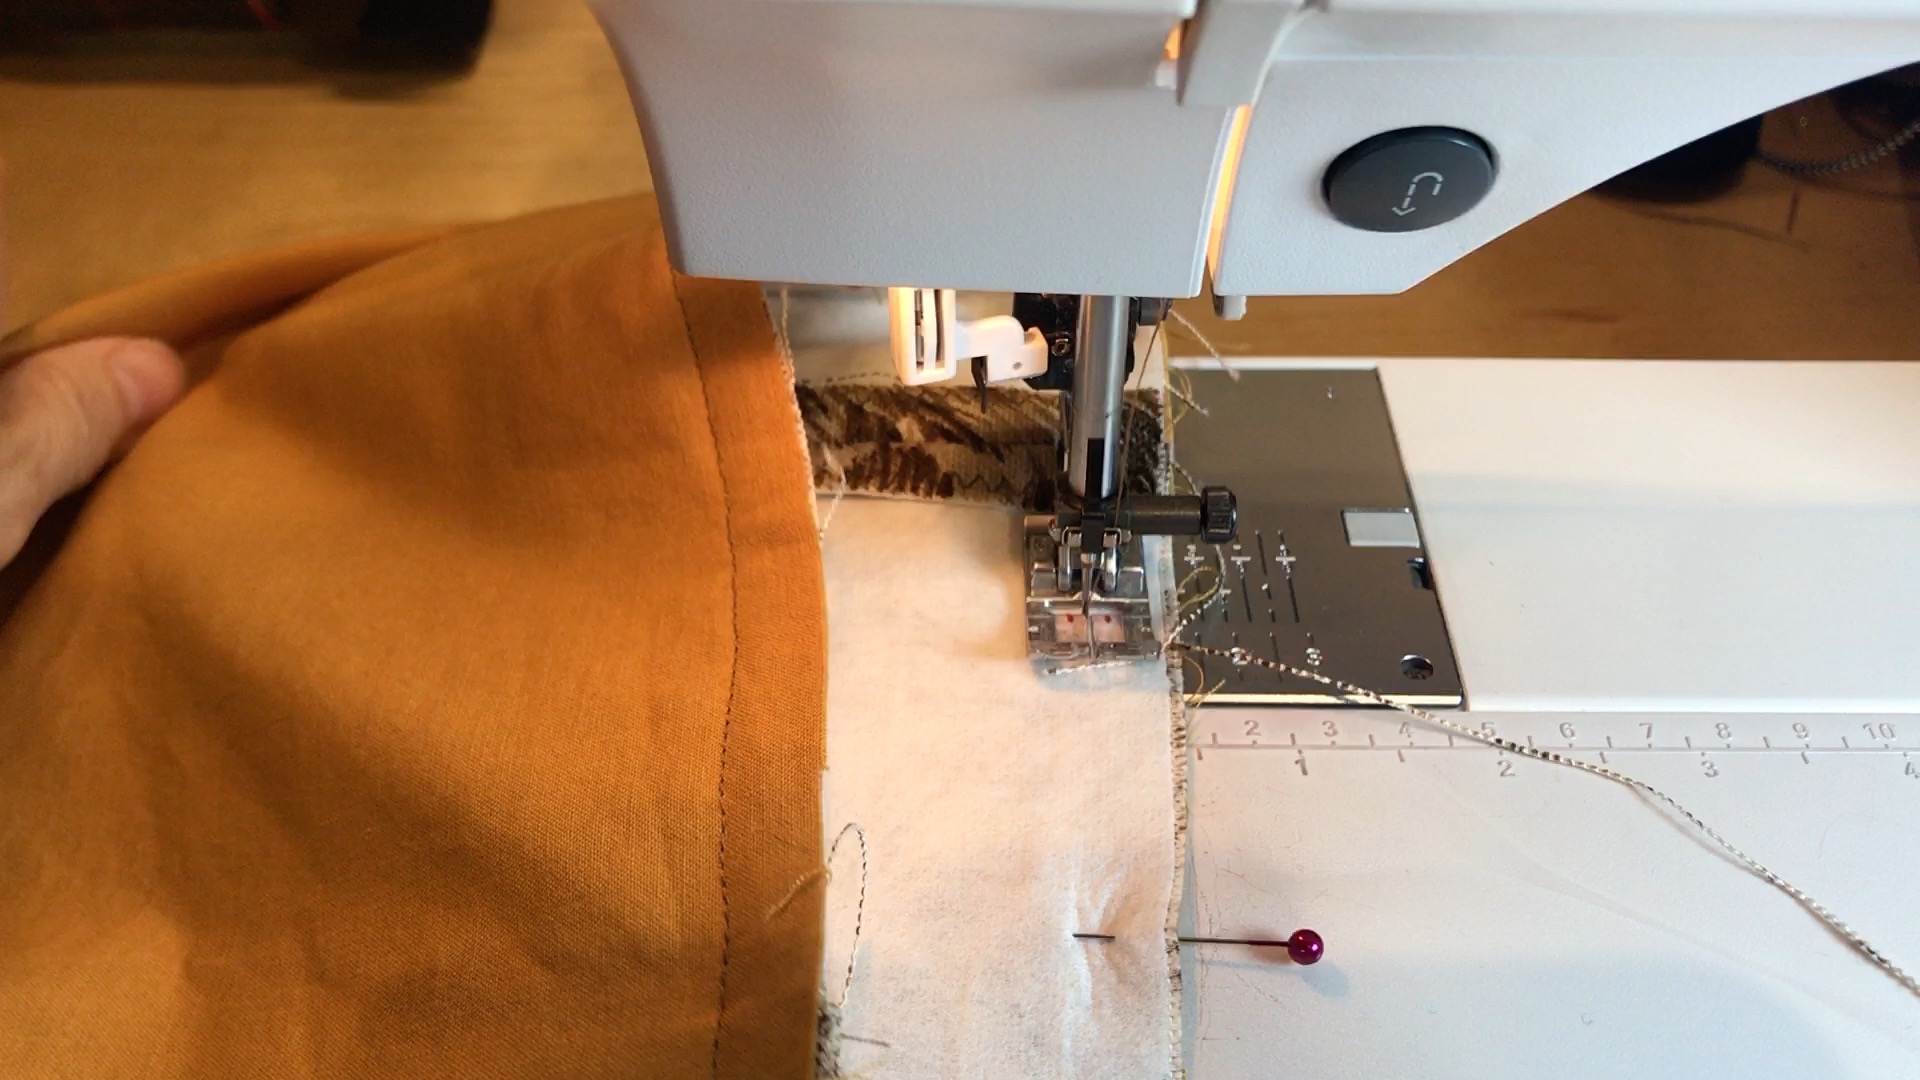 Sewing on Applique on a sewing machine